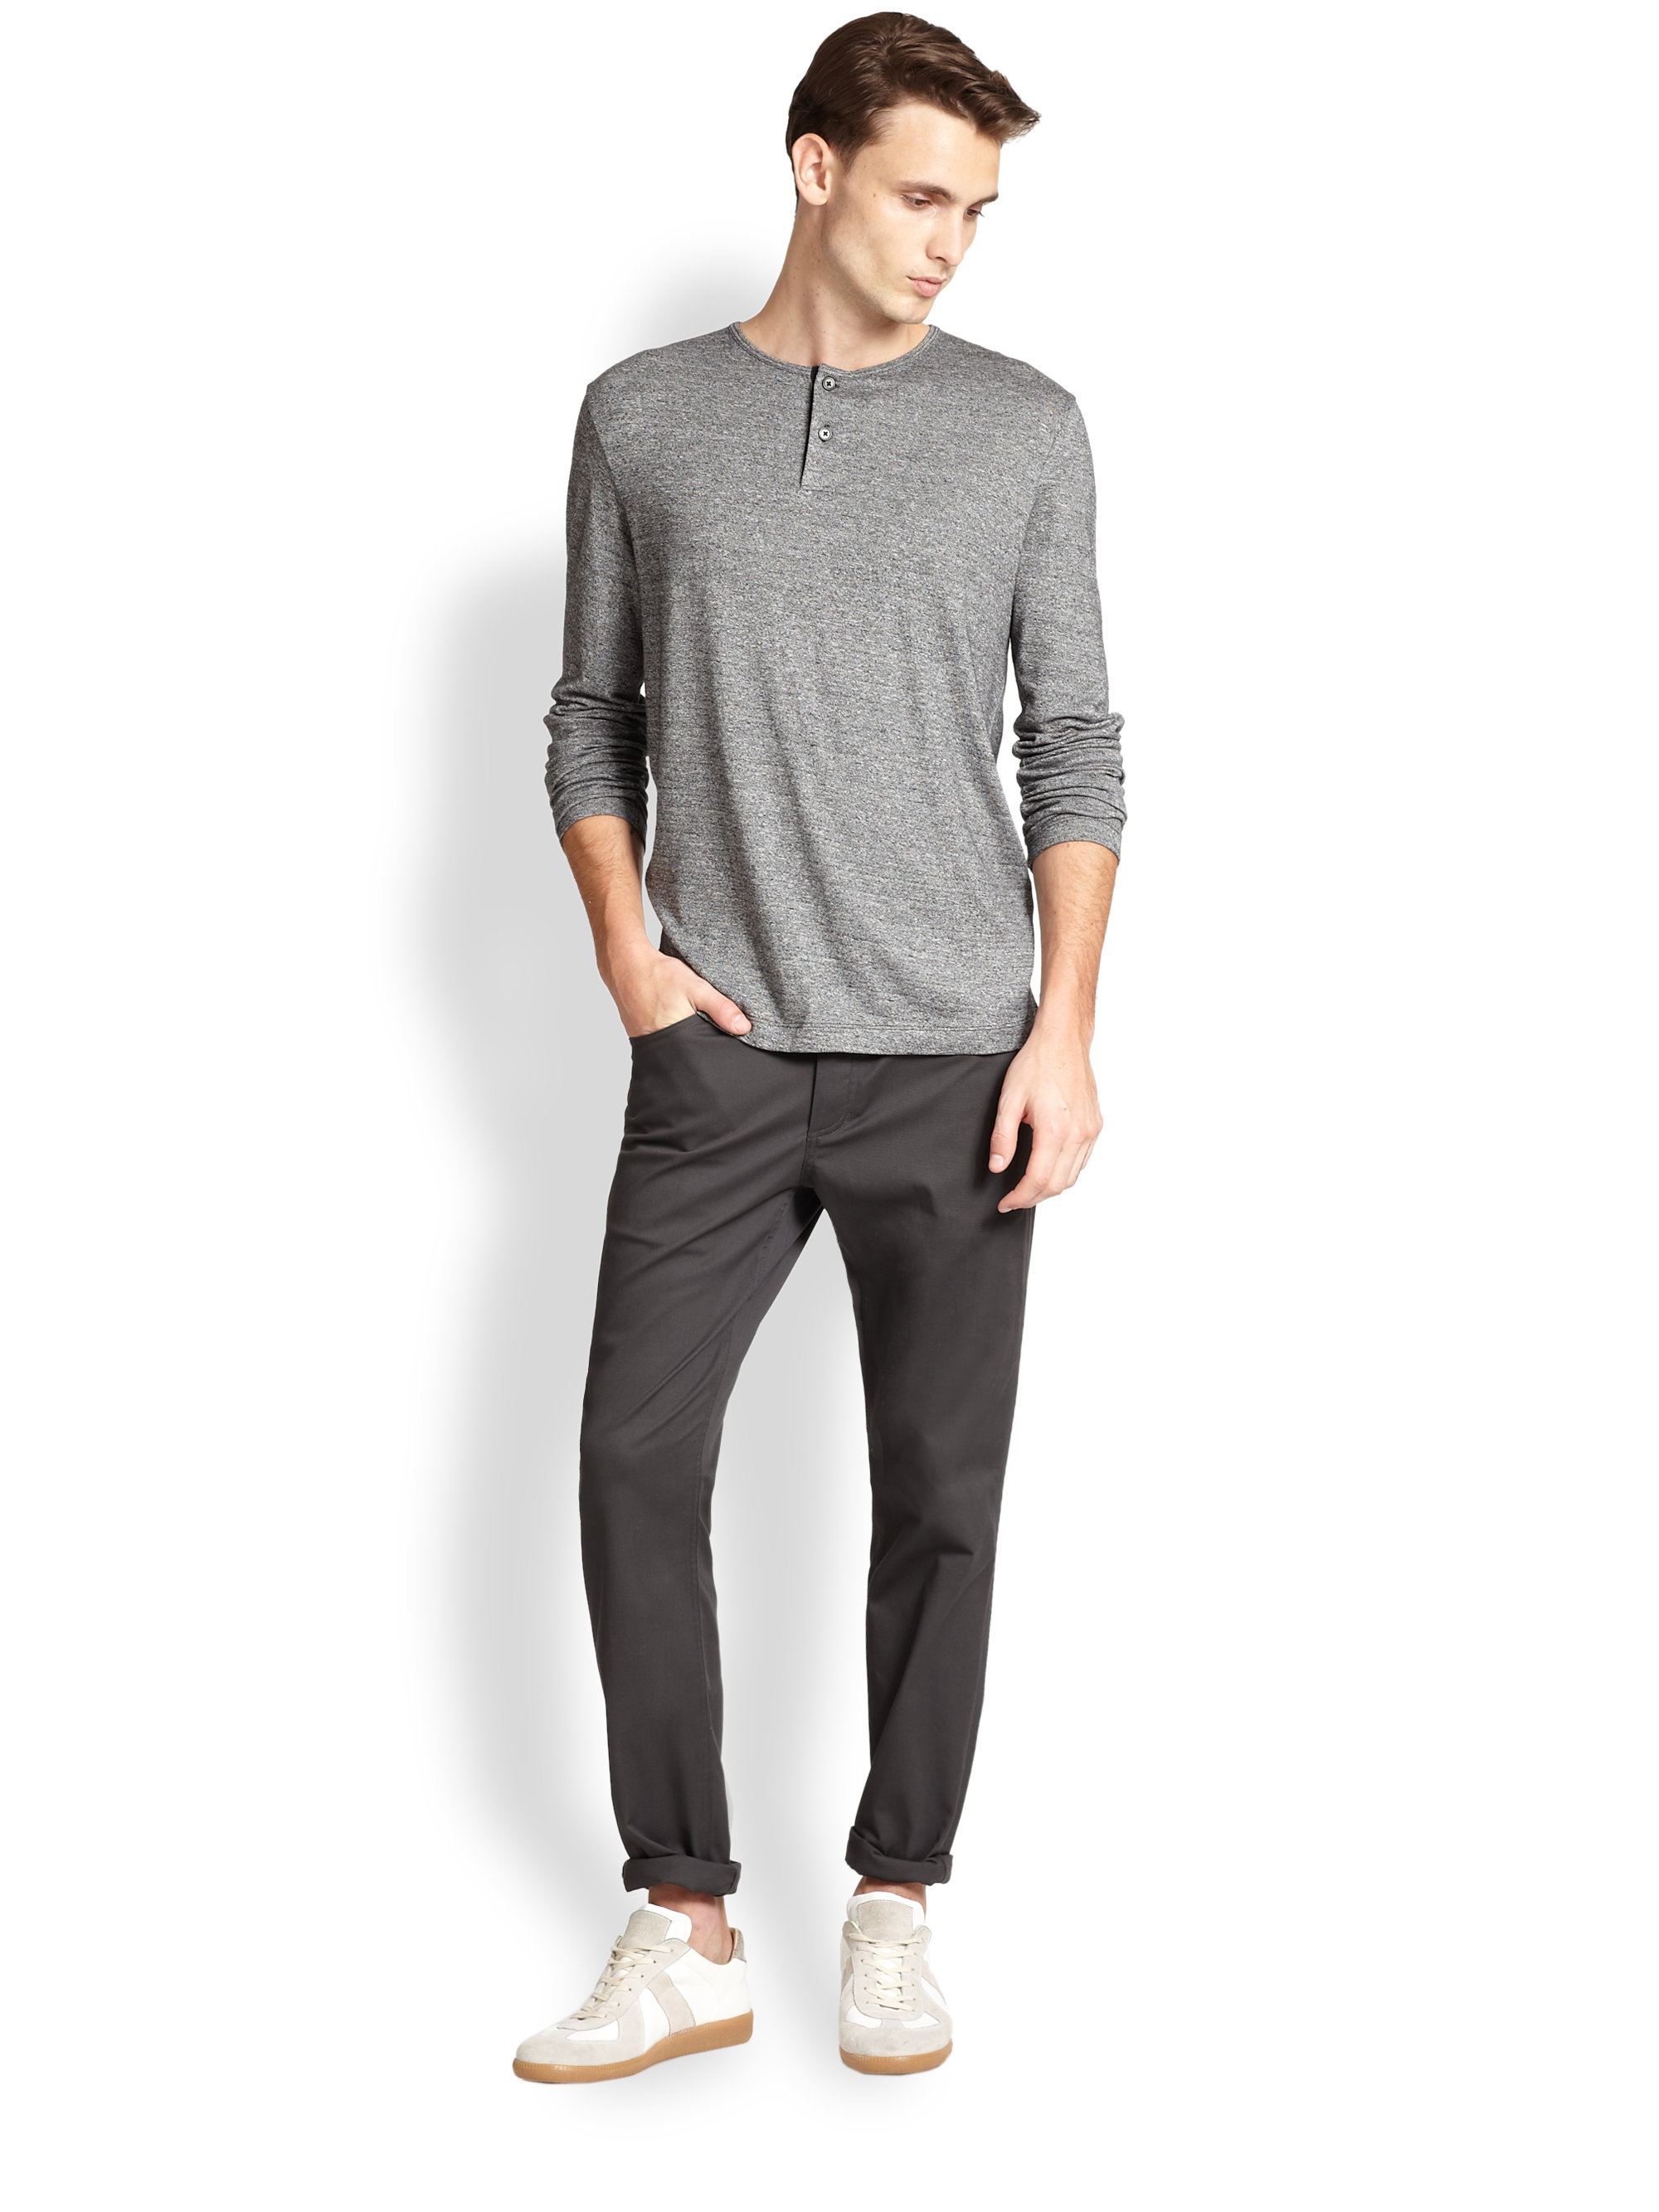 Theory Sayer Marled Henley in Grey (Gray) for Men - Lyst